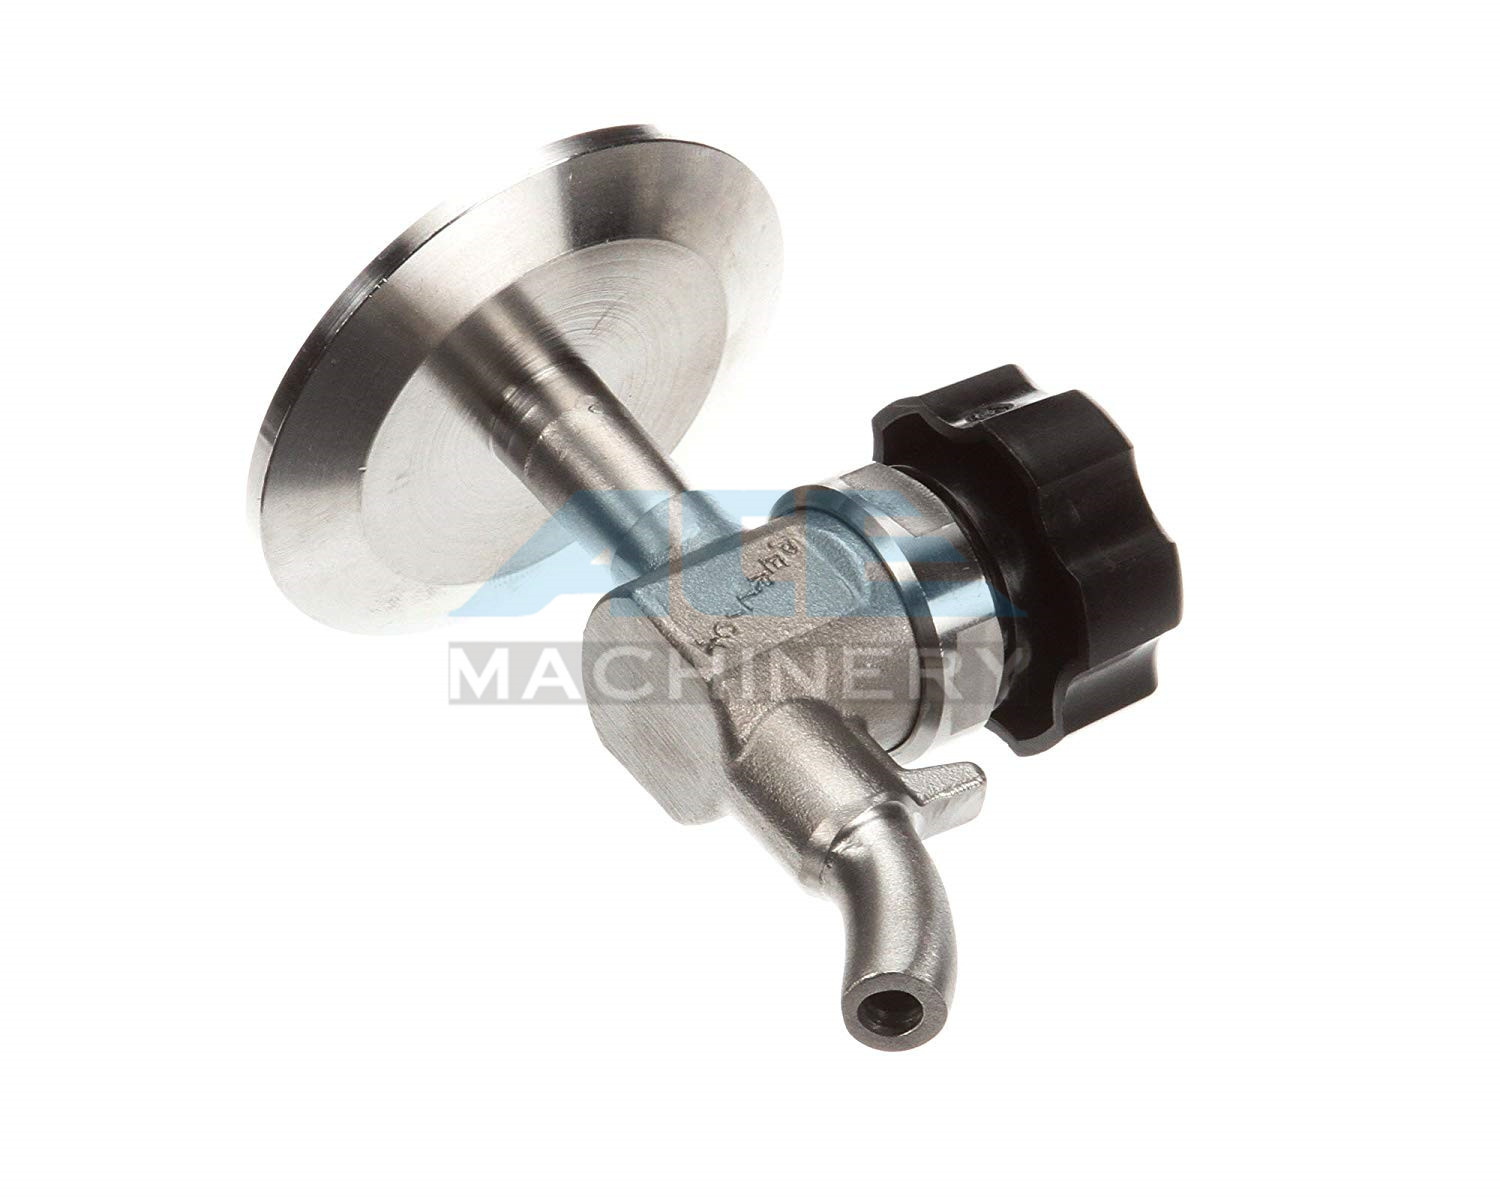 Stainless Steel Perlick Sample Valve for Beer Brewery Aseptic Sample Valve for High Purity Application